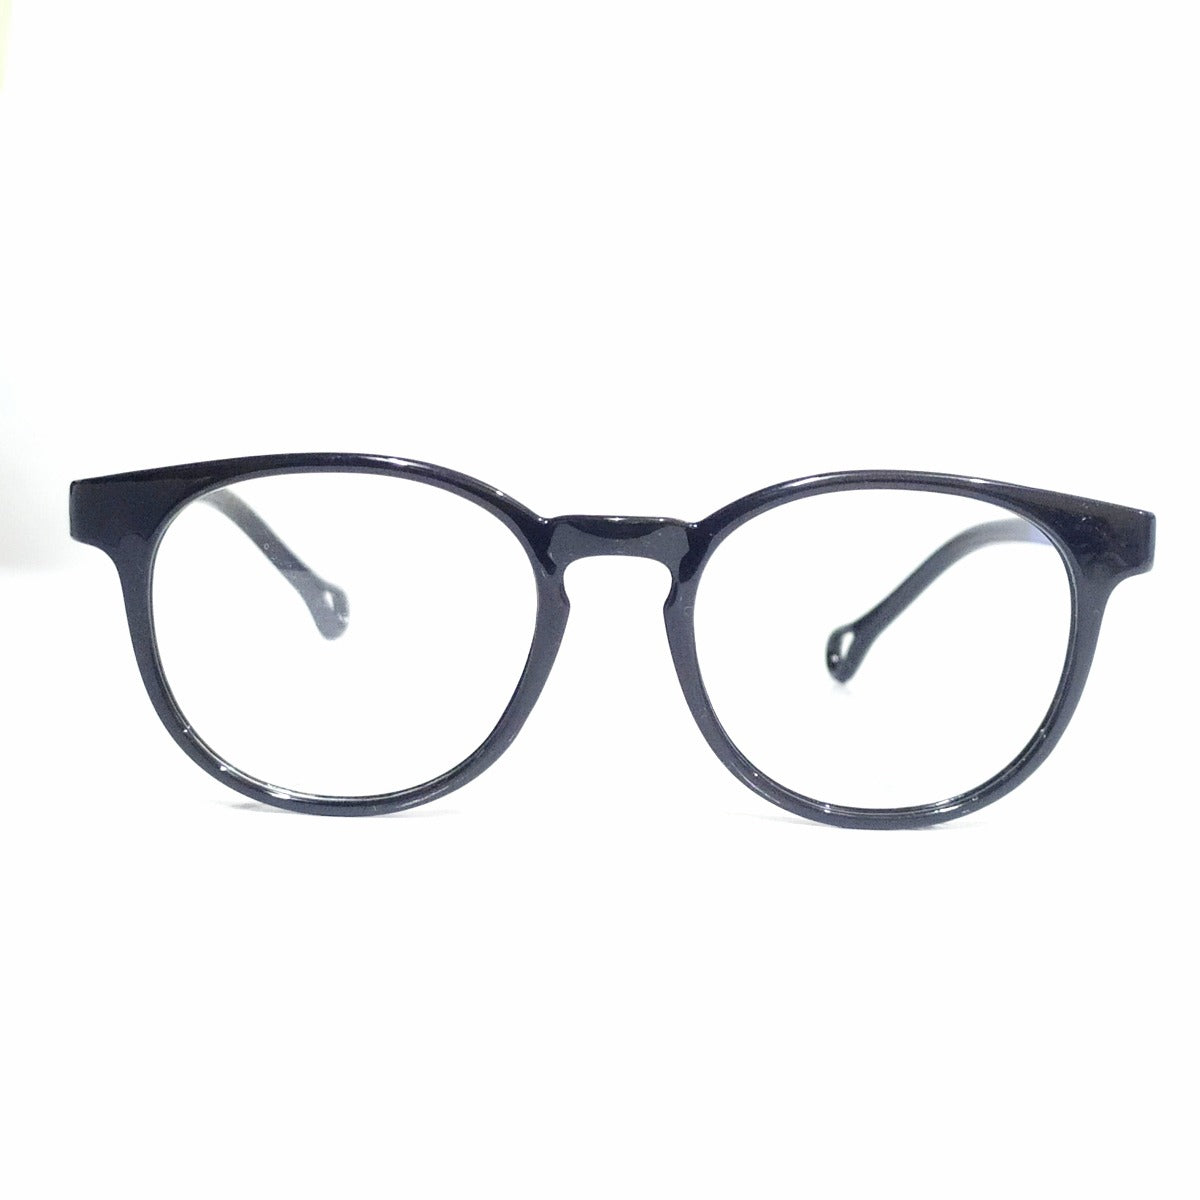 Round Black-Blue Kids Glasses for 5-6 Years